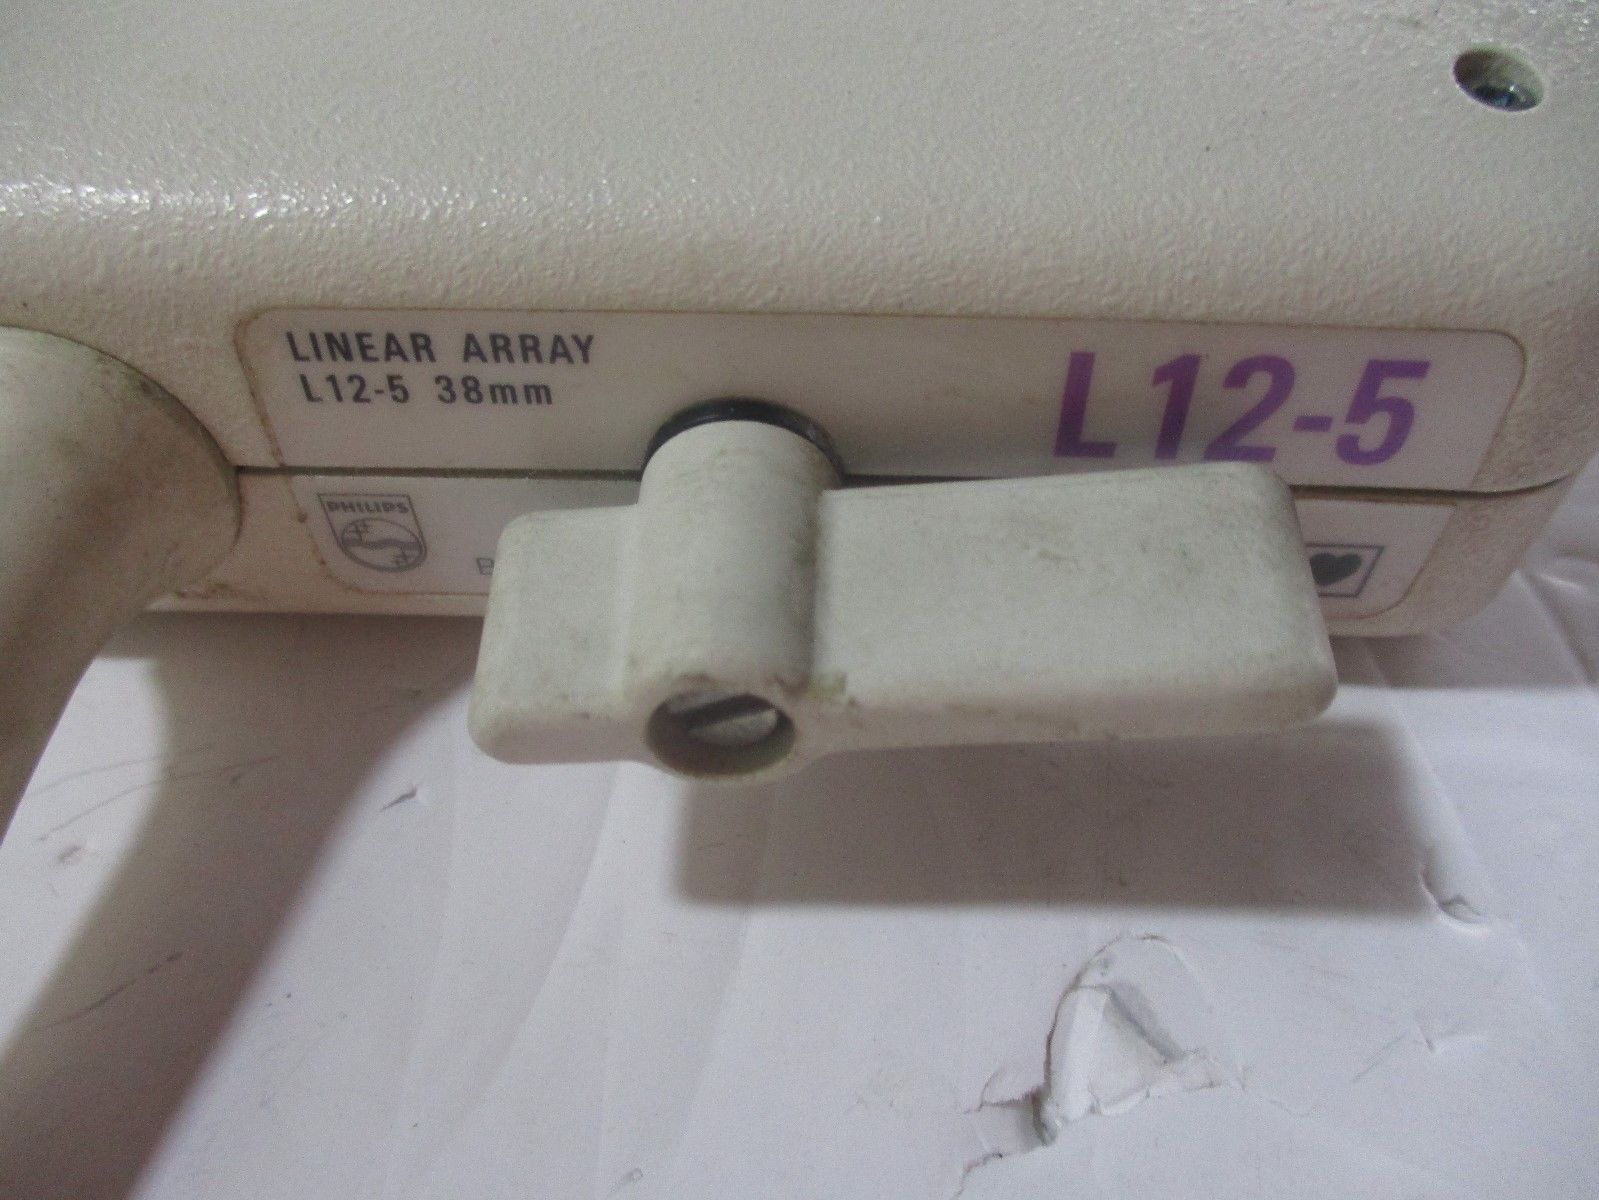 a close up of a probe with a label on it